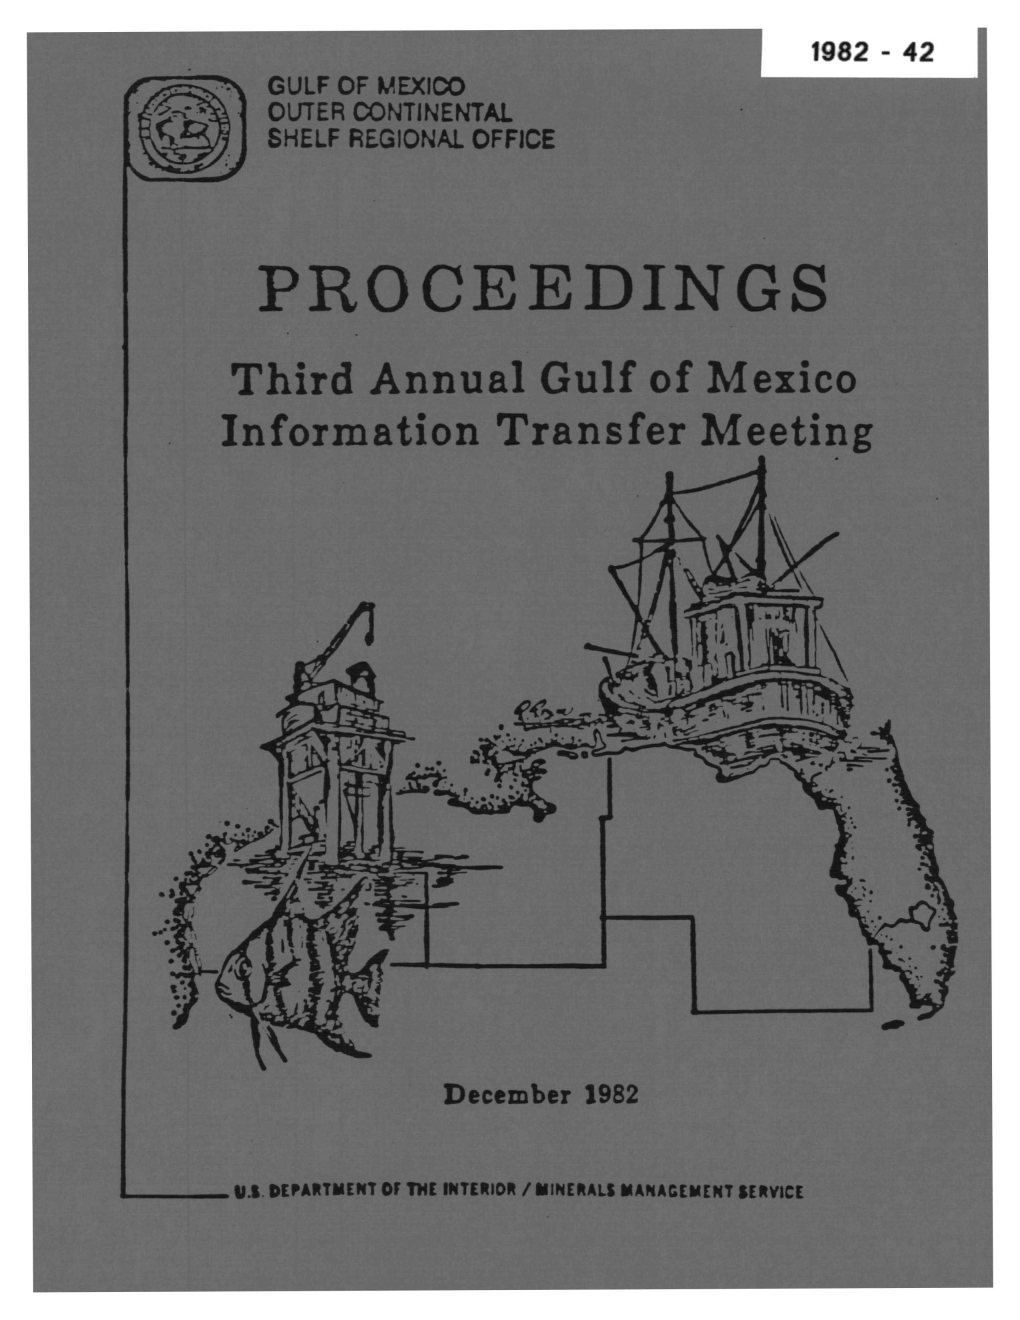 Third Annual Gulf of Mexico Information Transfer Meeting